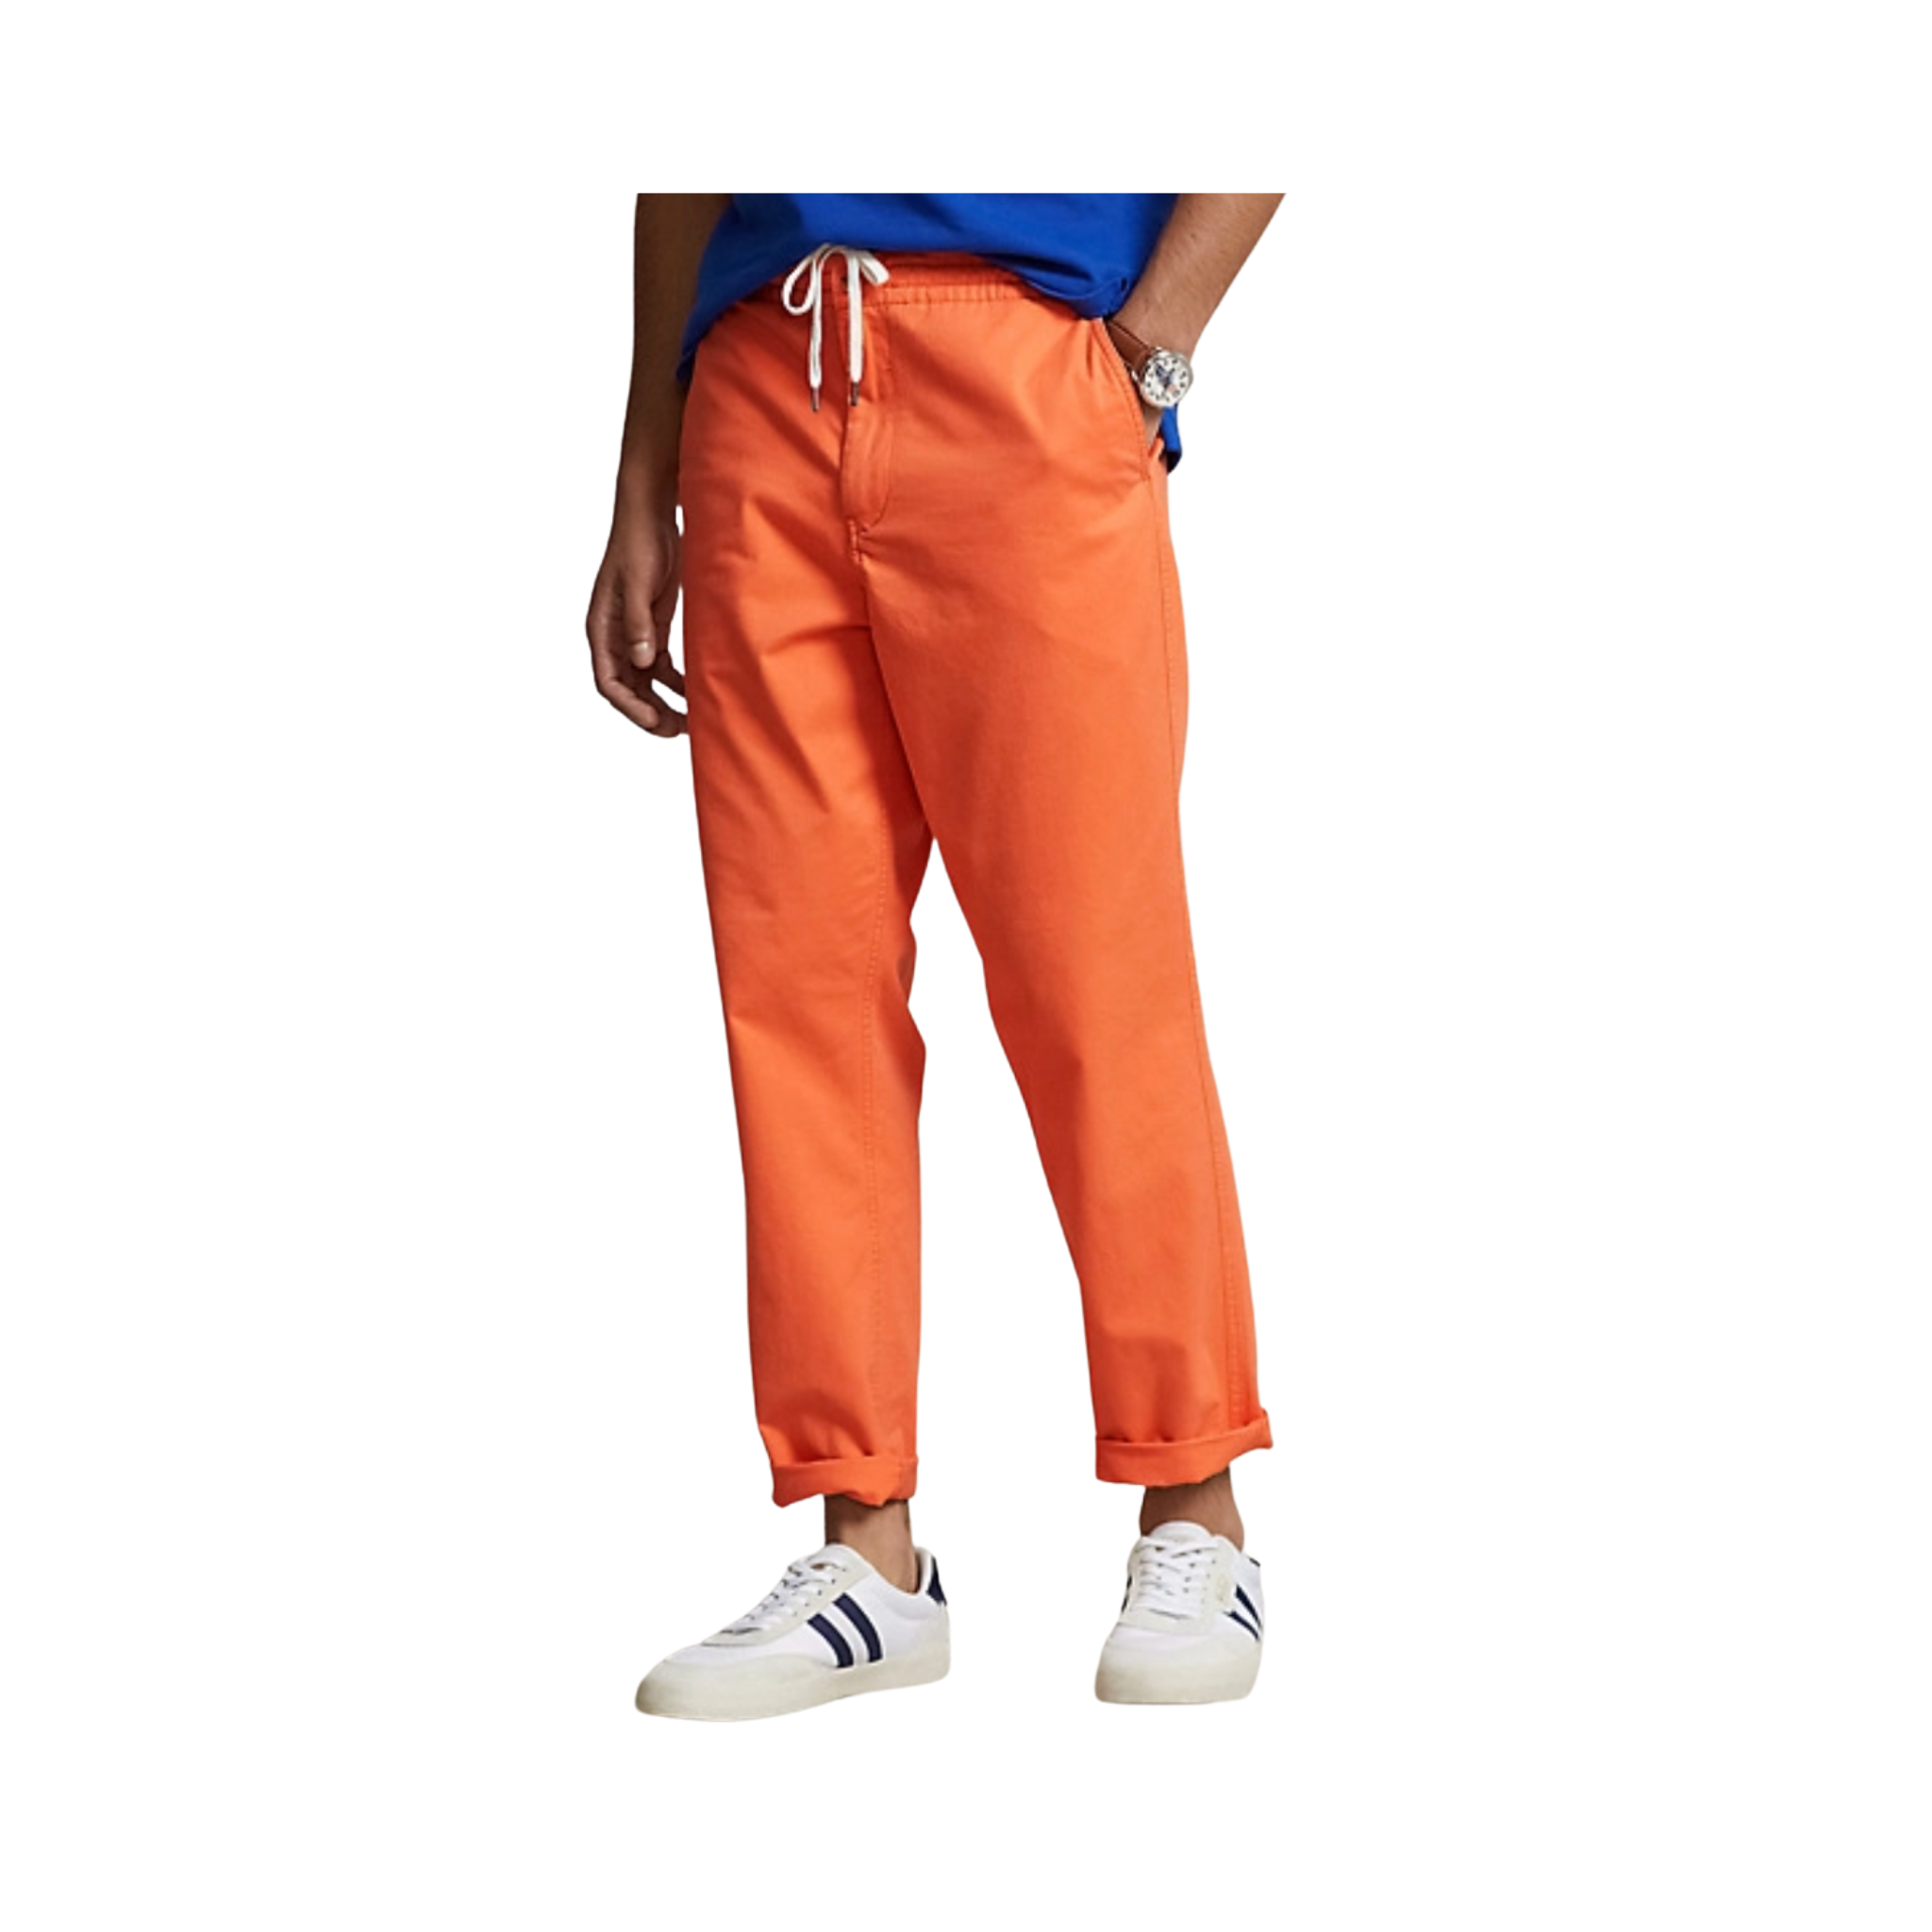 RALPH LAUREN POLO PREPSTER CLASSIC FIT CHINO